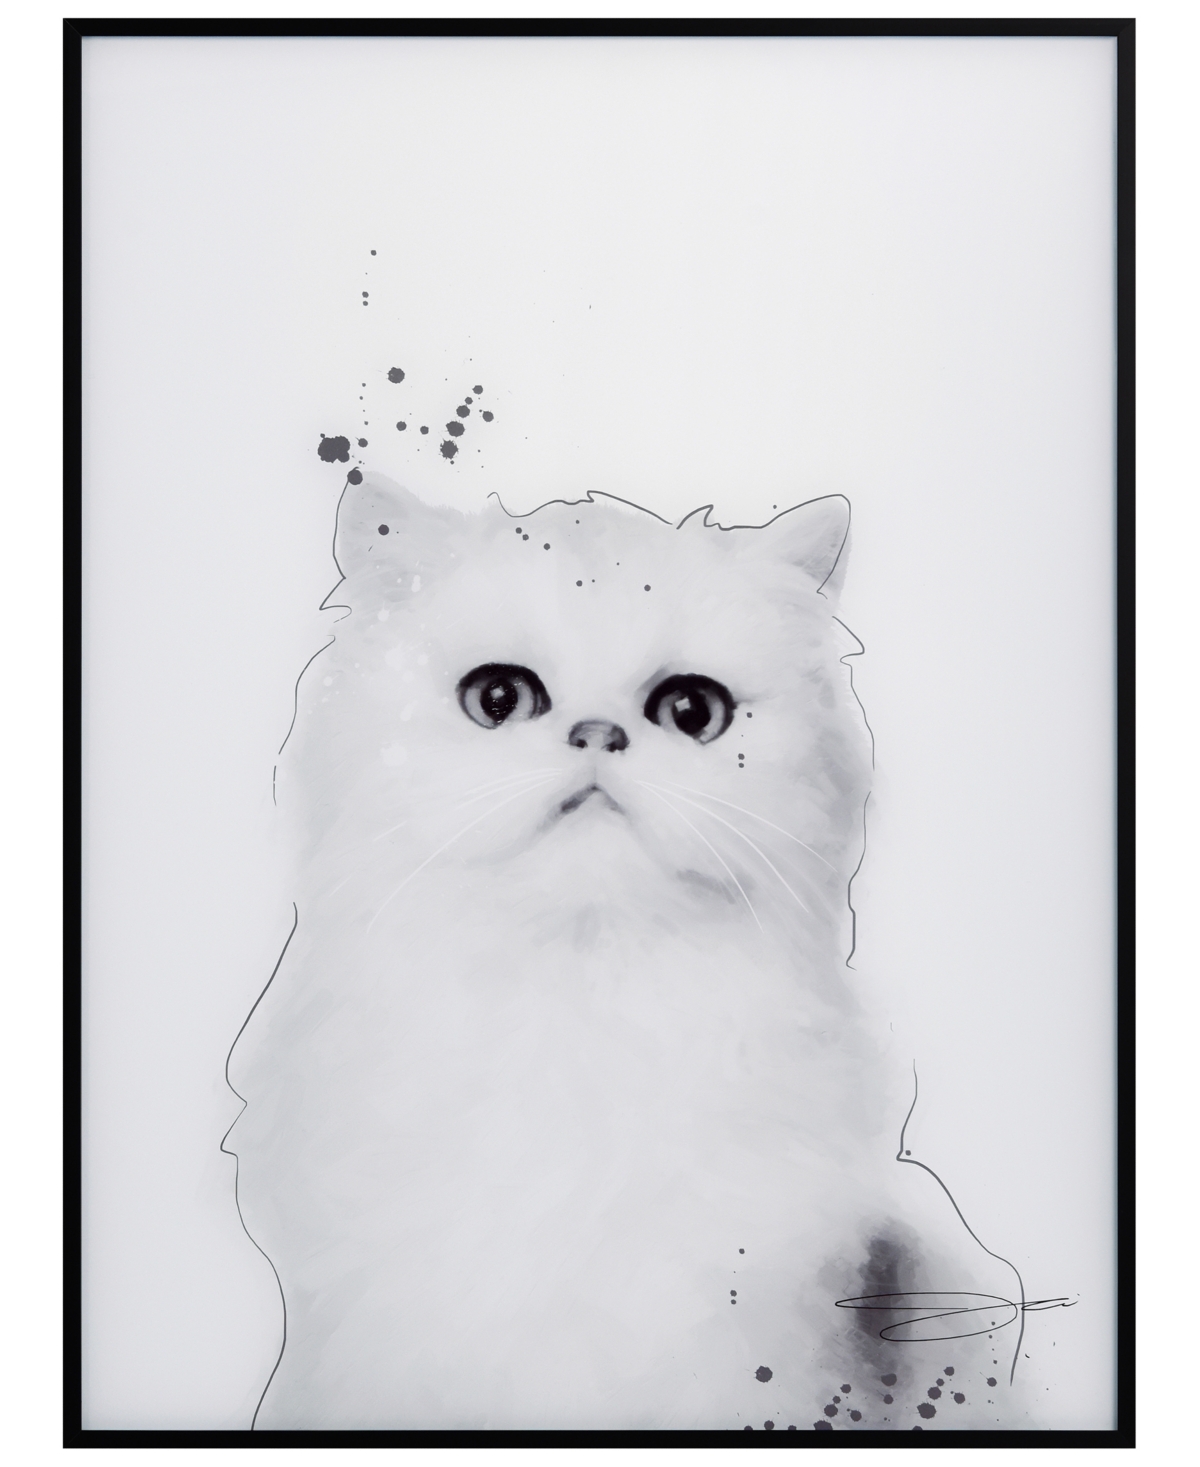 Empire Art Direct "persian" Pet Paintings On Printed Glass Encased With A Black Anodized Frame, 24" X 18" X 1" In Black And White